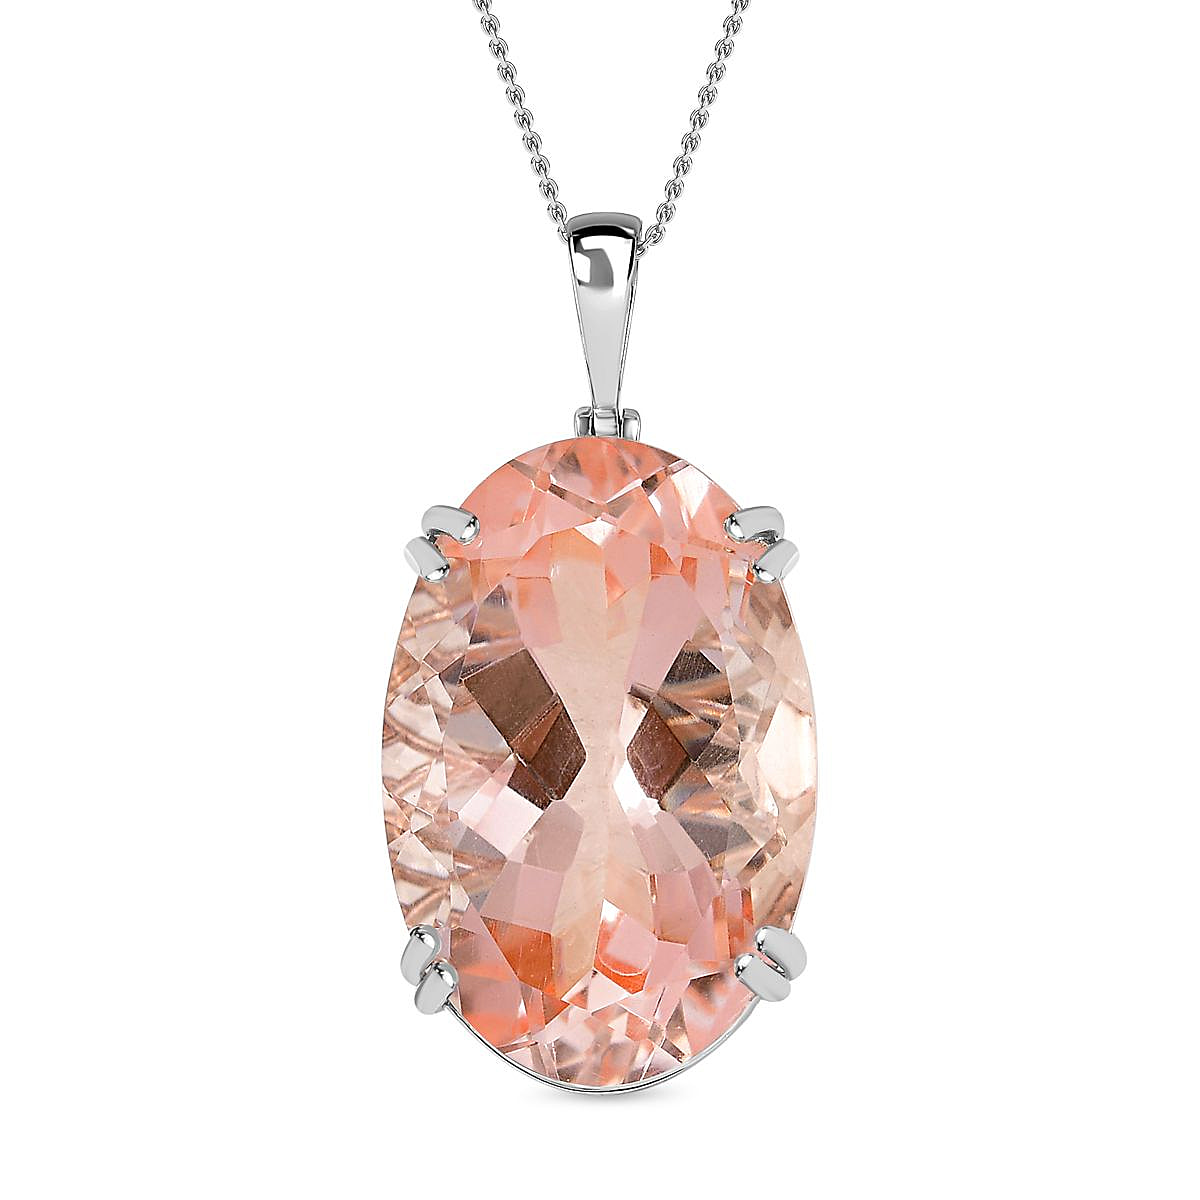 Morganite Color Quartz Pendant with Chain (Size 20) in Platinum Overlay Sterling Silver  Wt. 10.36 Gms  50.000  Ct.